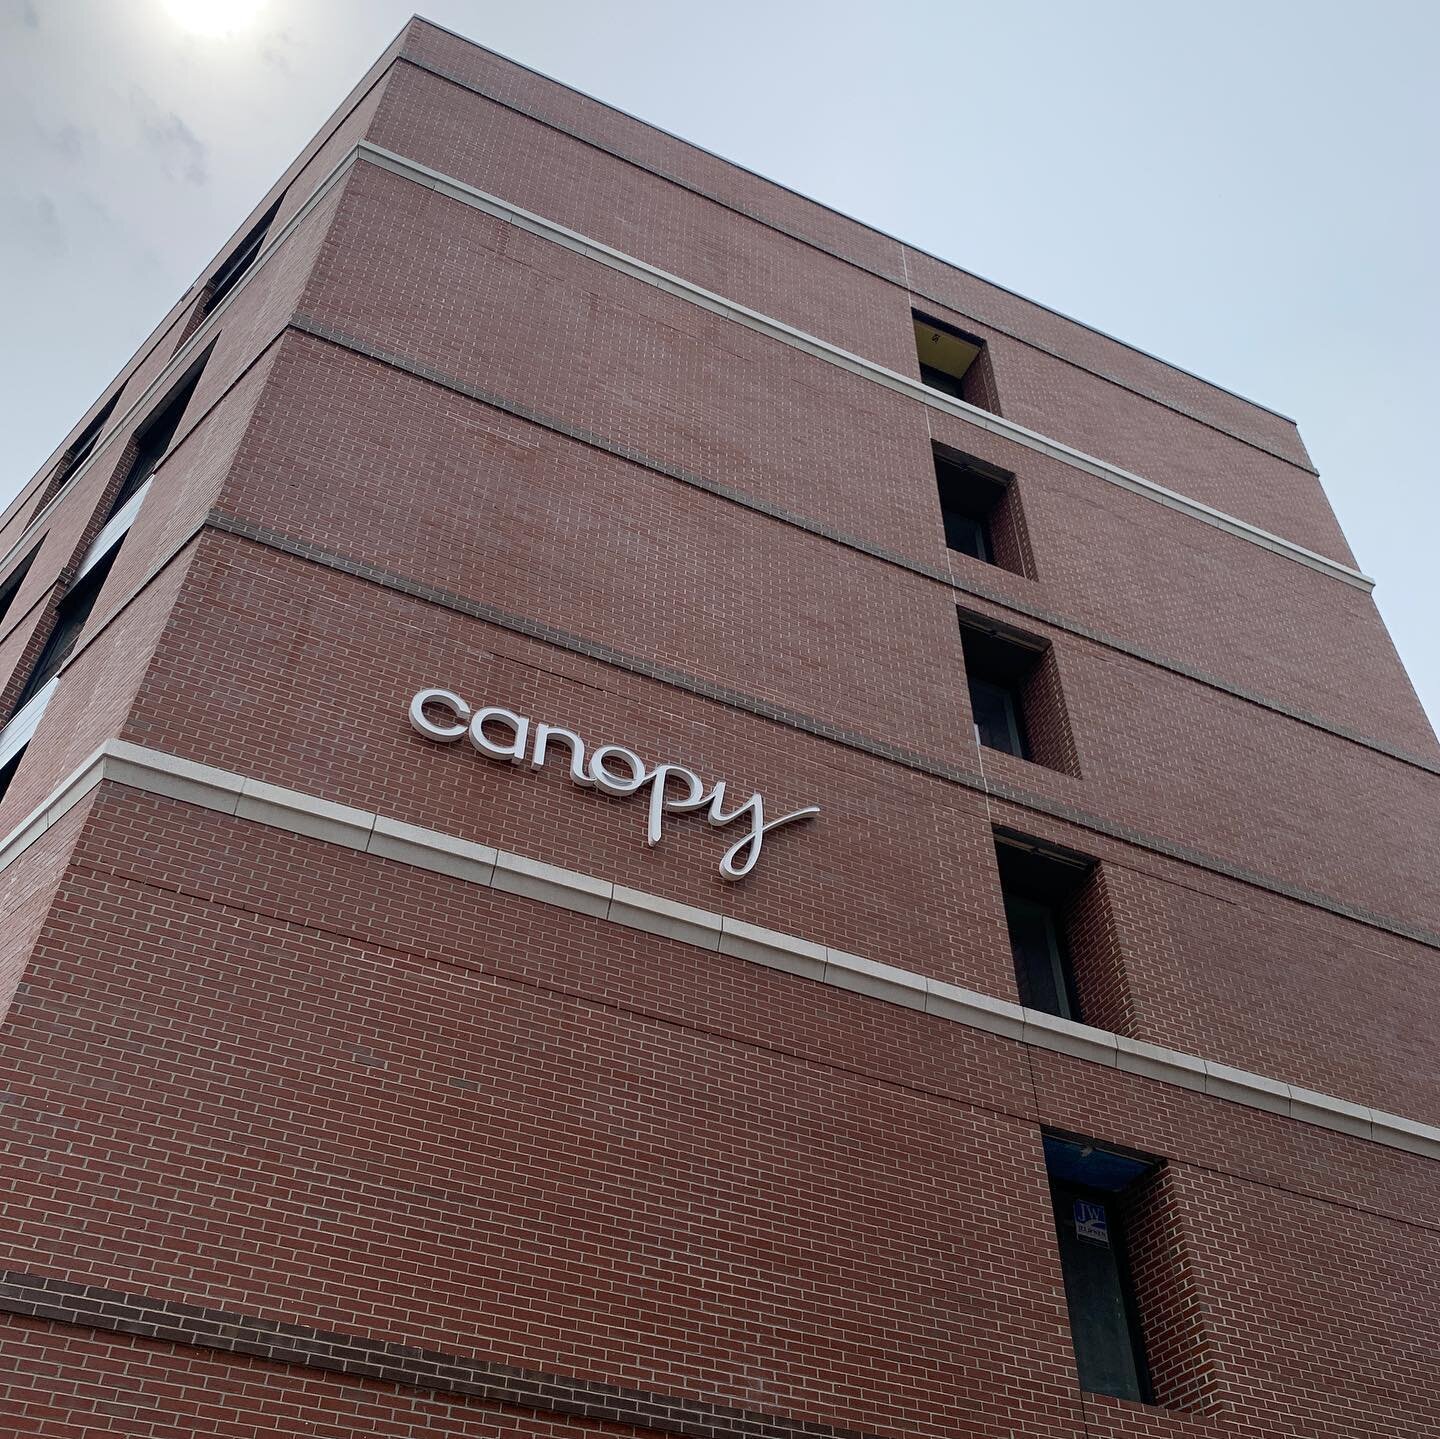 Over the past few years, I've had the incredible opportunity to bring to life an art program for the new @canopy_portland_waterfront hotel opening soon! This art program reflects Portland with a design that celebrates the area's history, culture, and